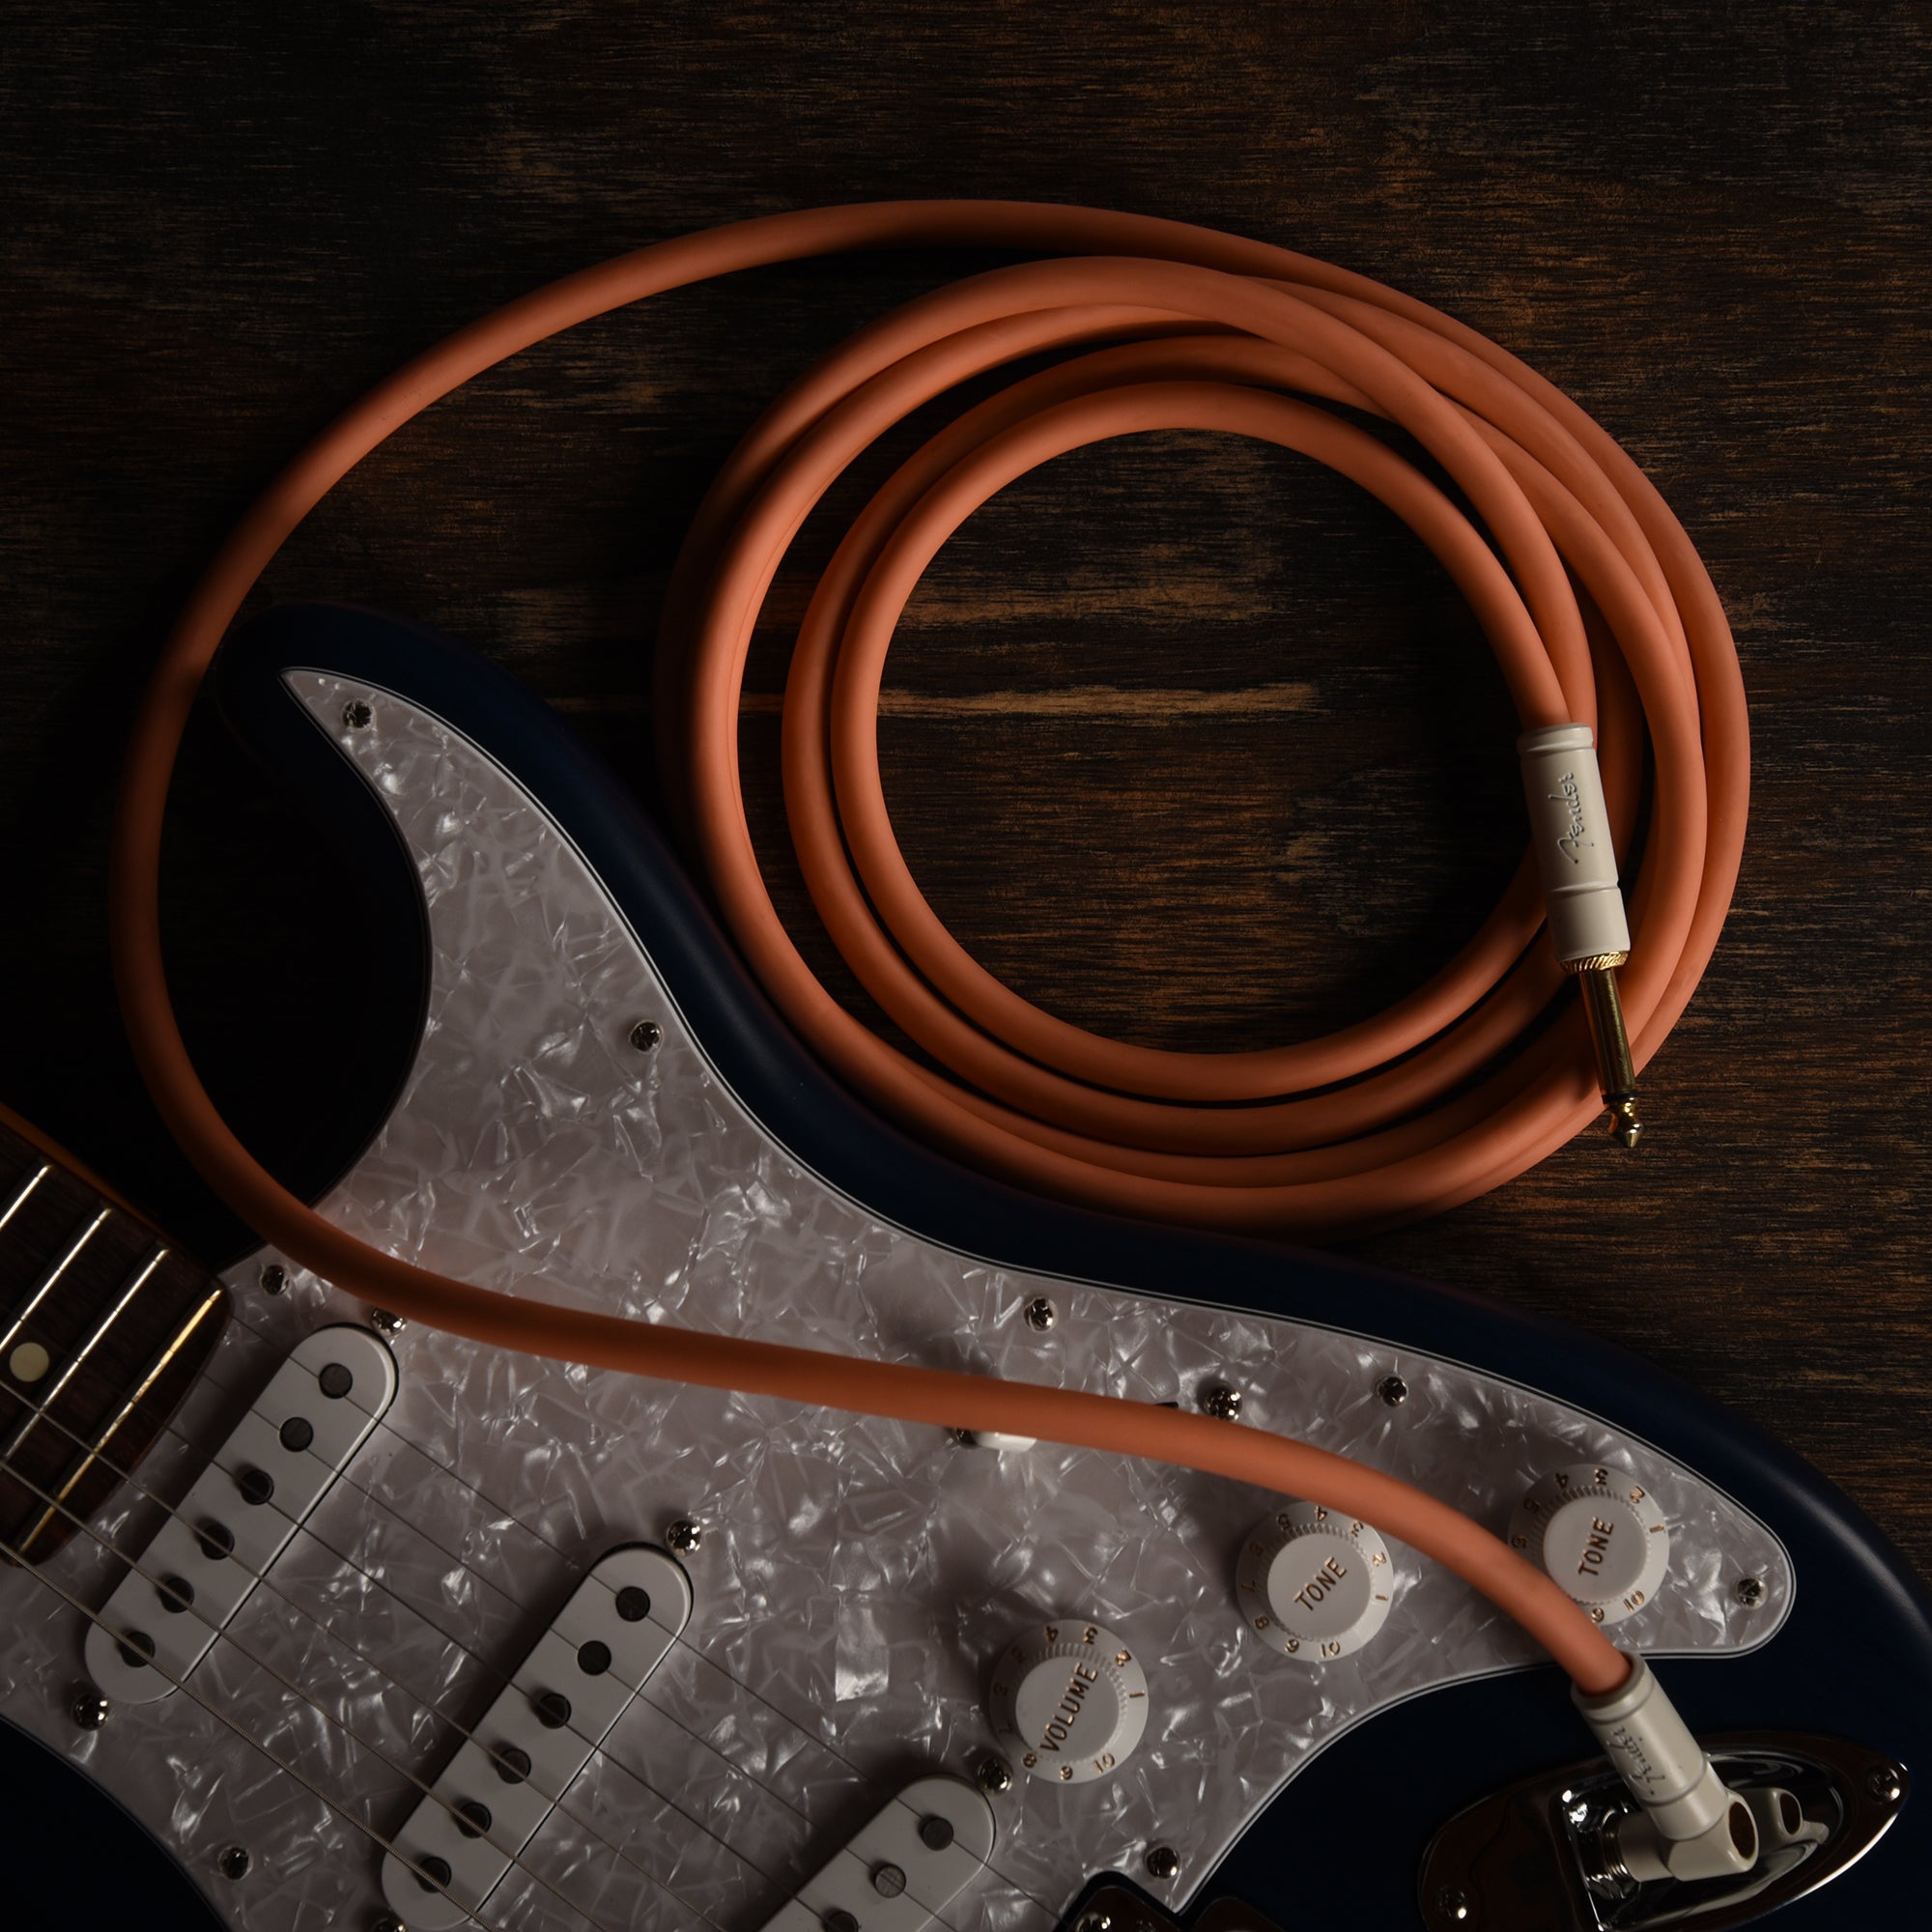 Fender Deluxe Instrument Cable Pacific Peach 18.6' Angle-Straight